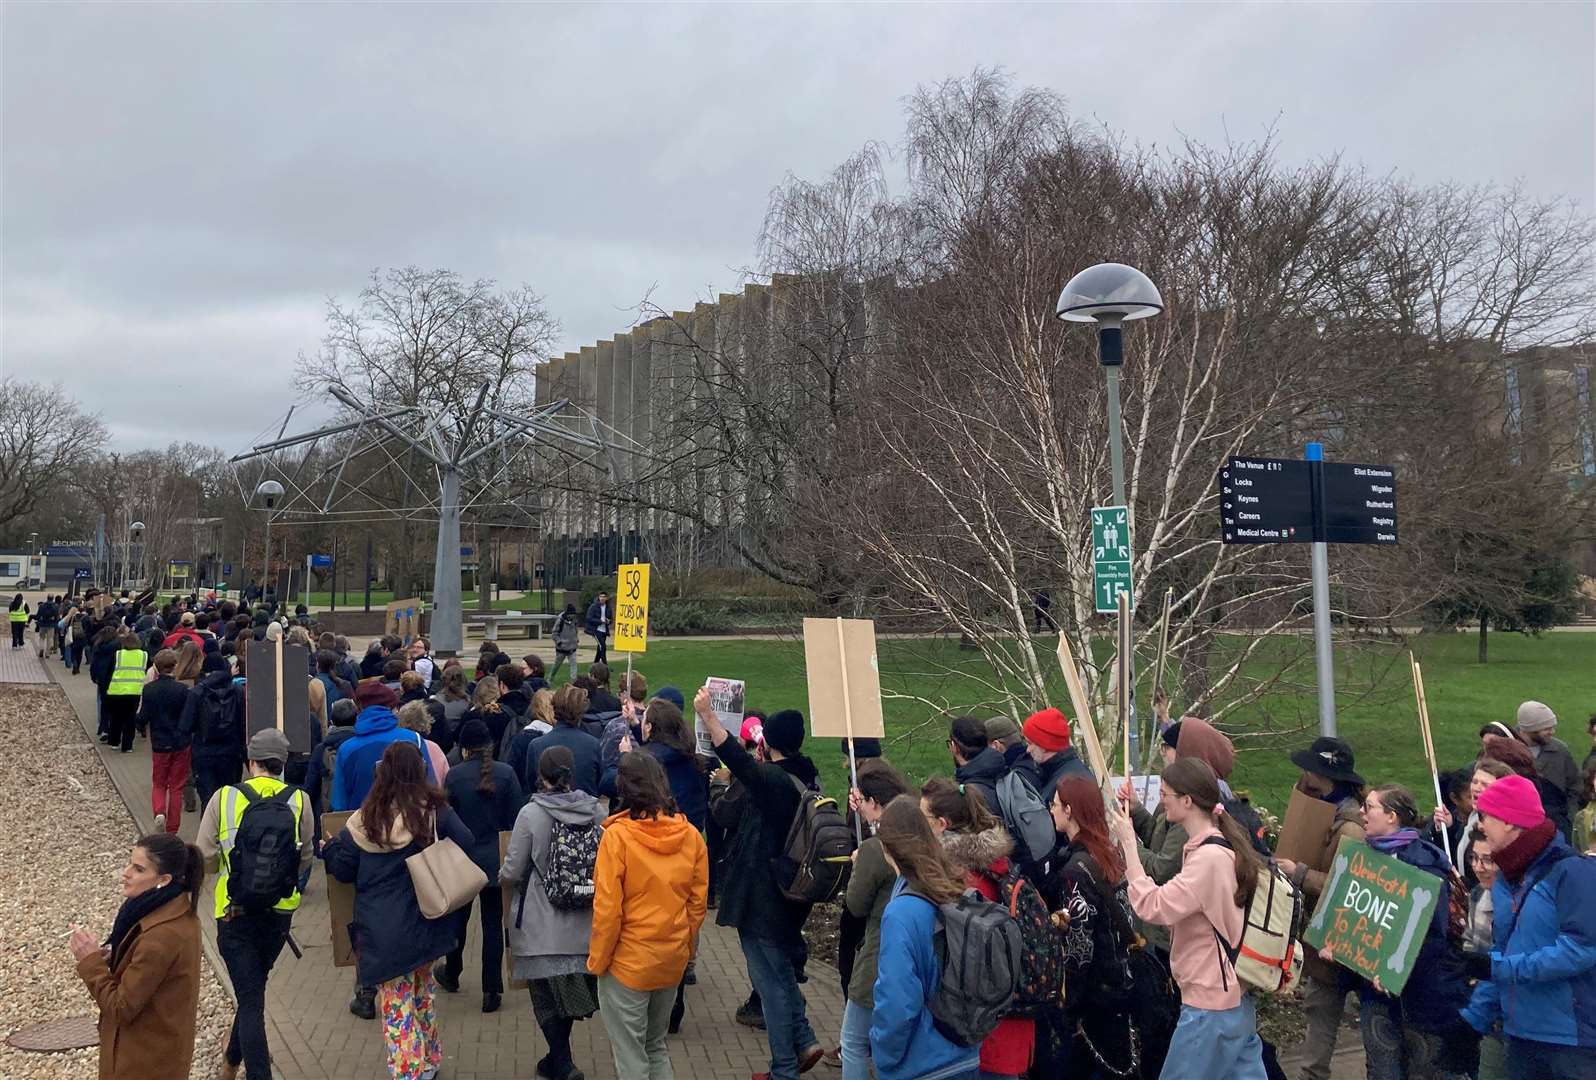 University of Kent students and staff protests over proposed course cuts and job losses